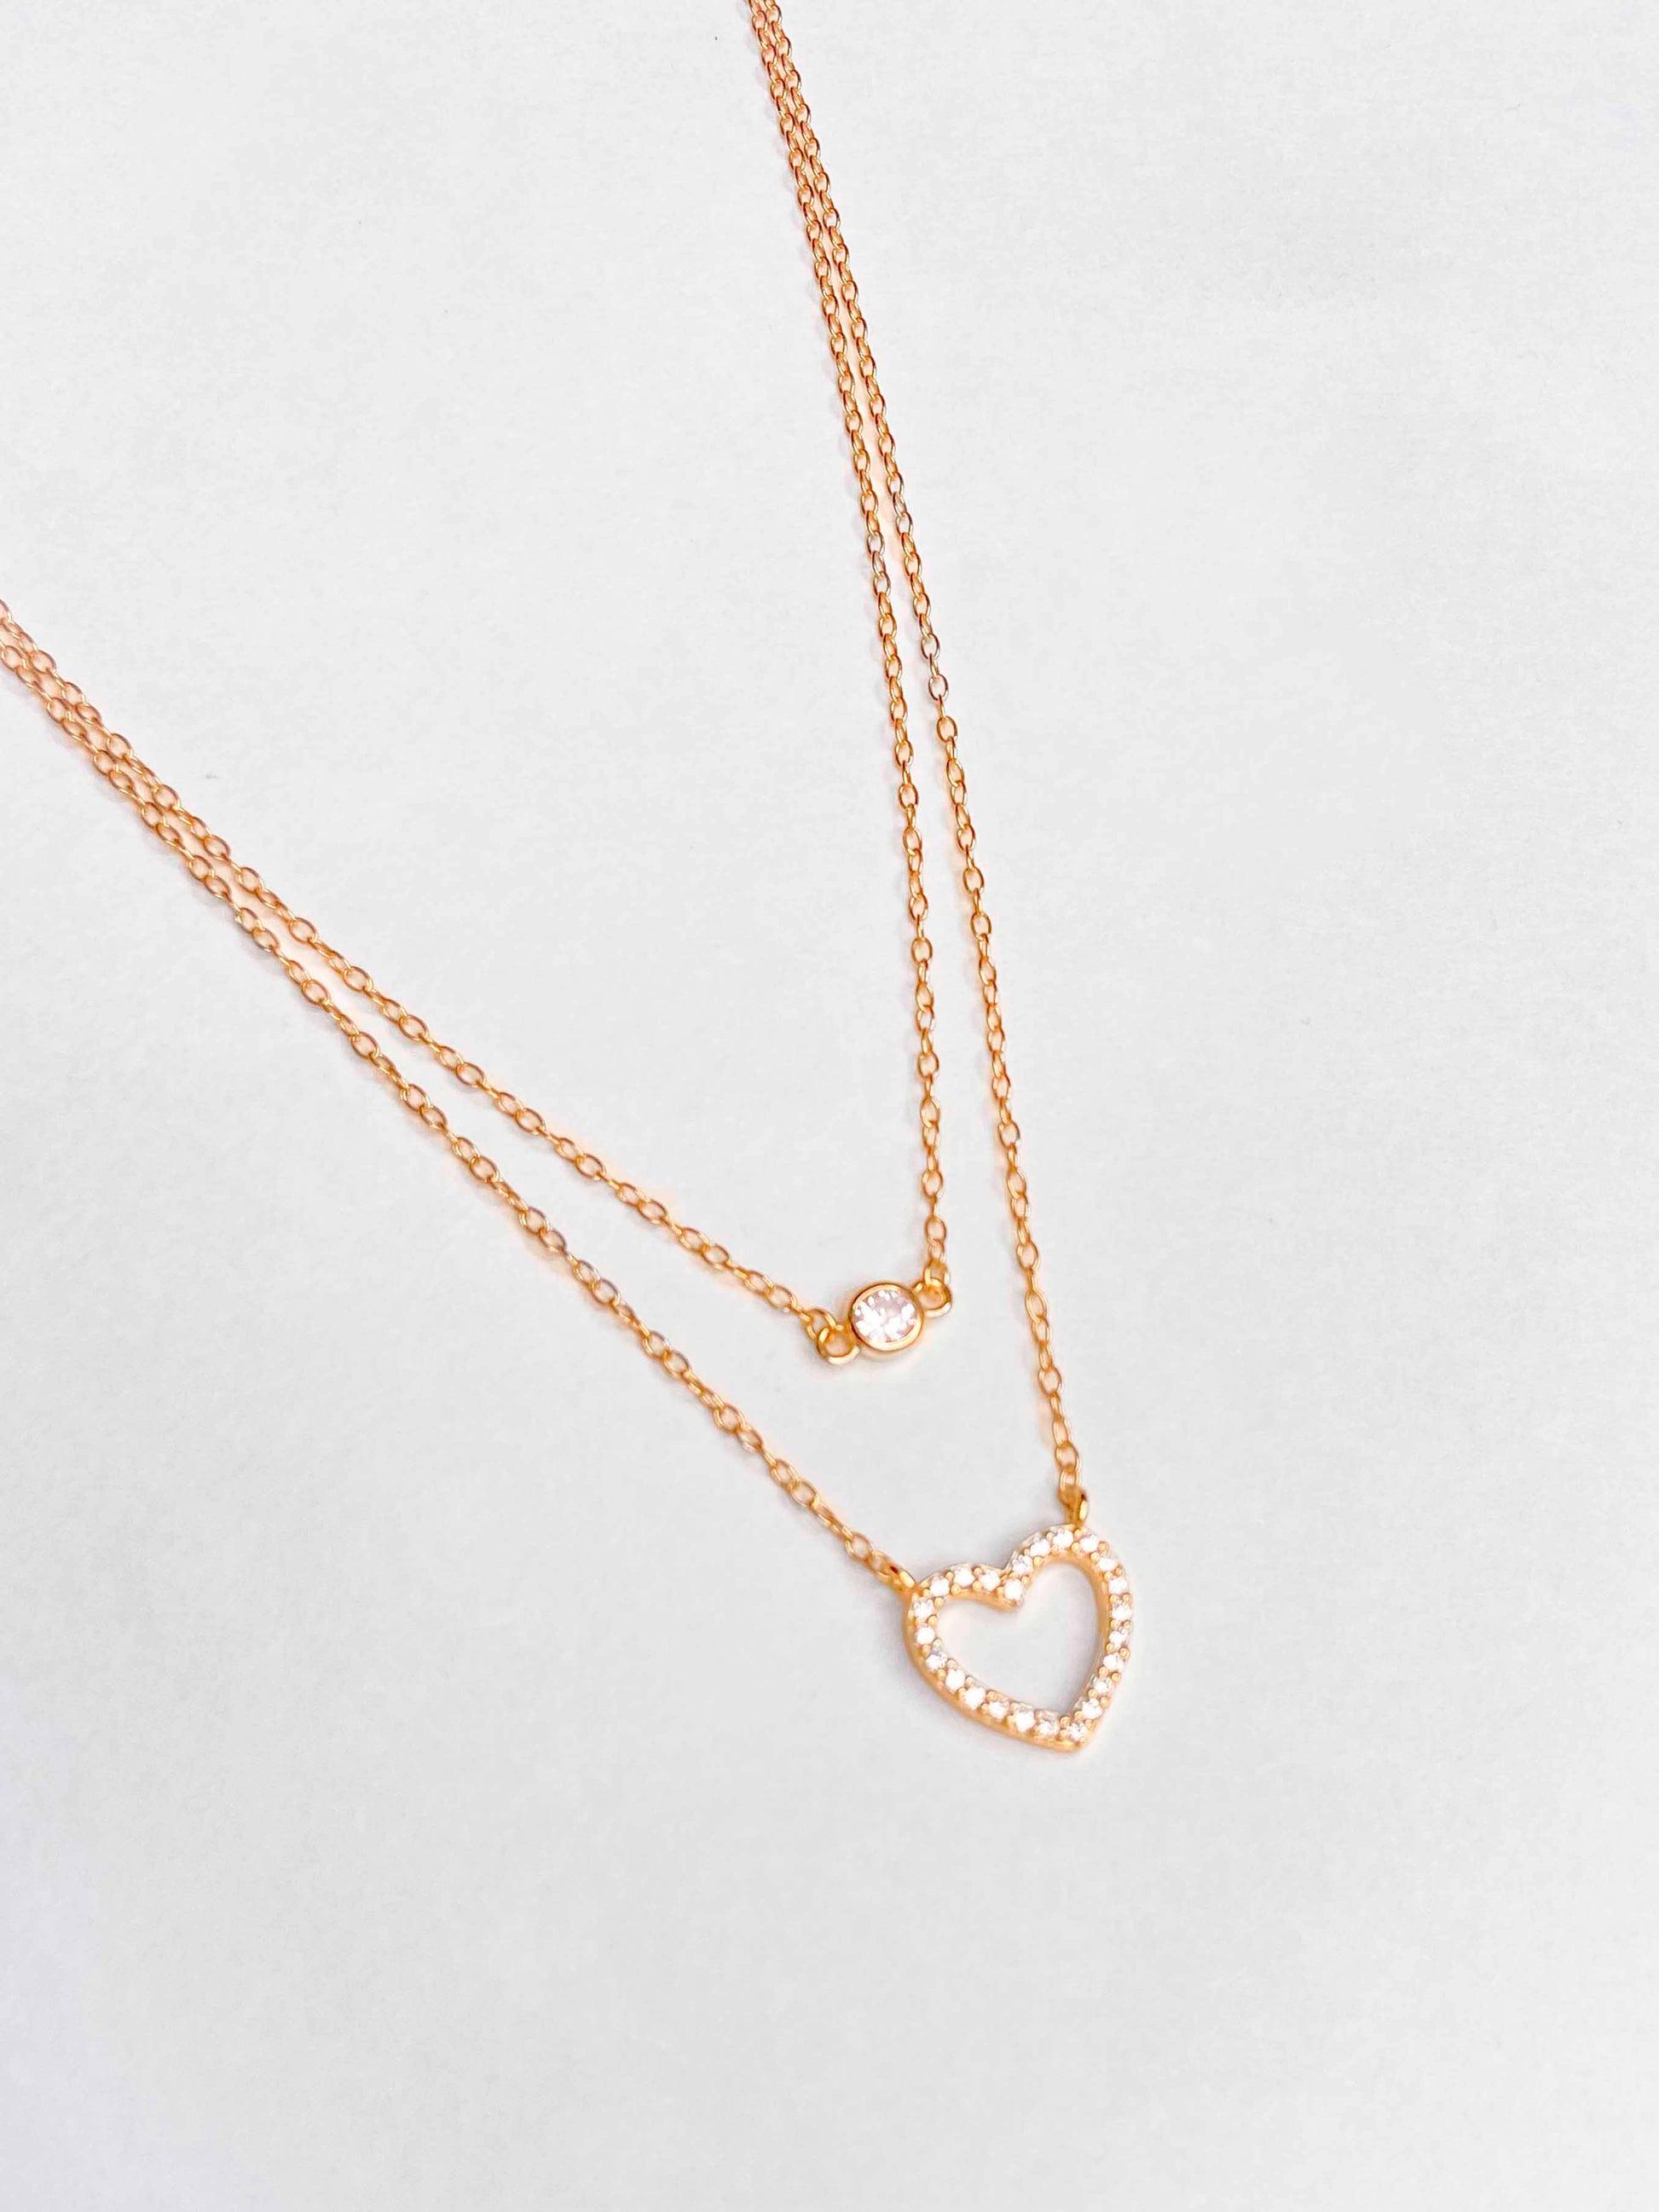 Gold-plated 925 sterling silver double-layer necklace delicate clavicle chain zircon necklace, and heart hoop earrings.